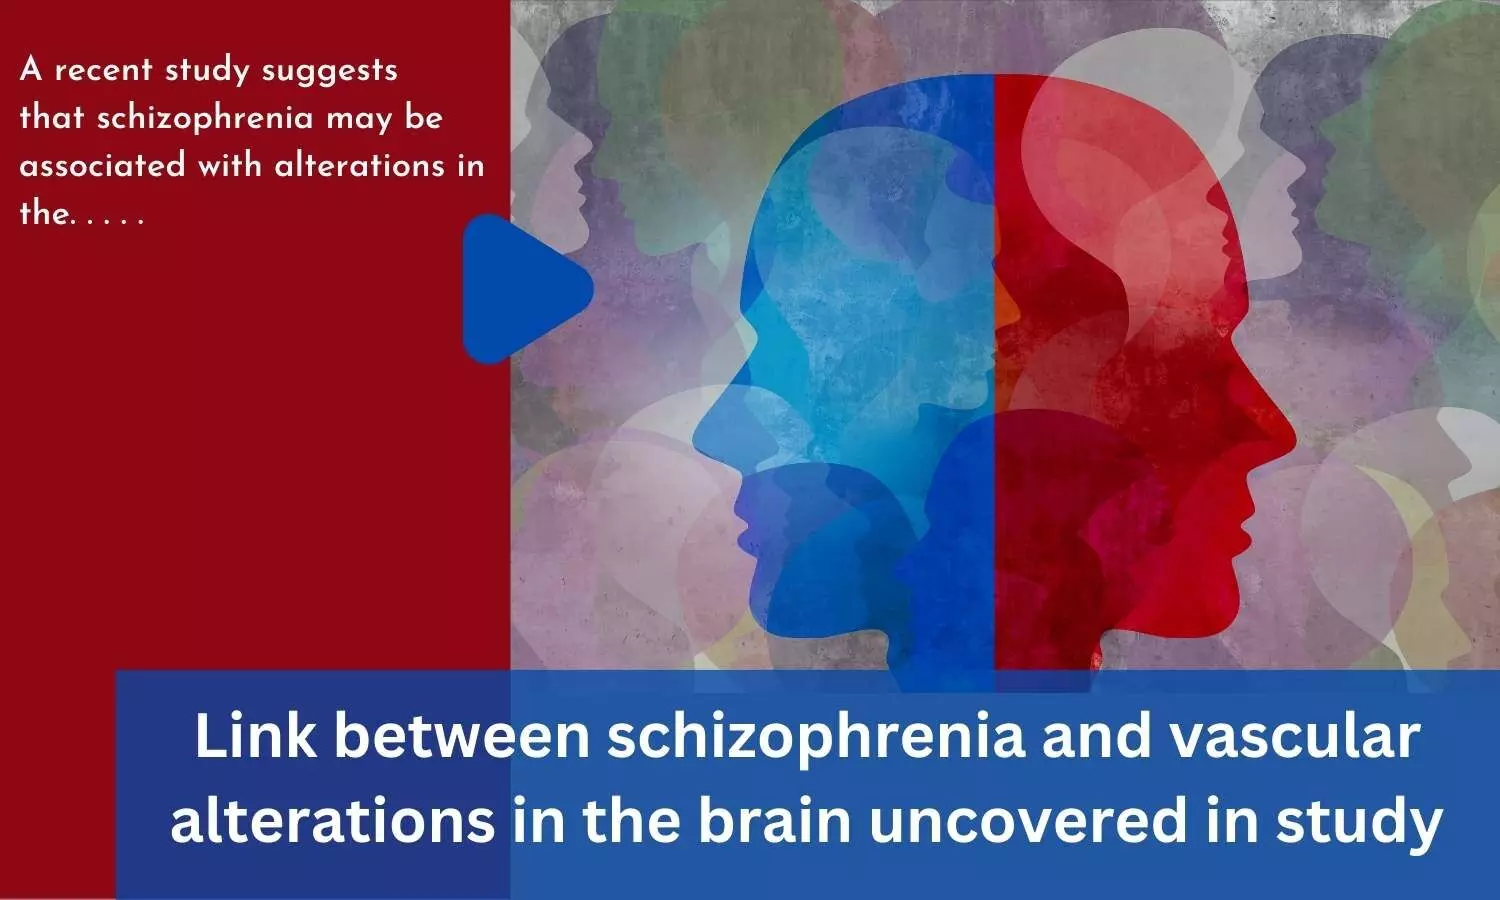 Link between schizophrenia and vascular alterations in the brain uncovered in study